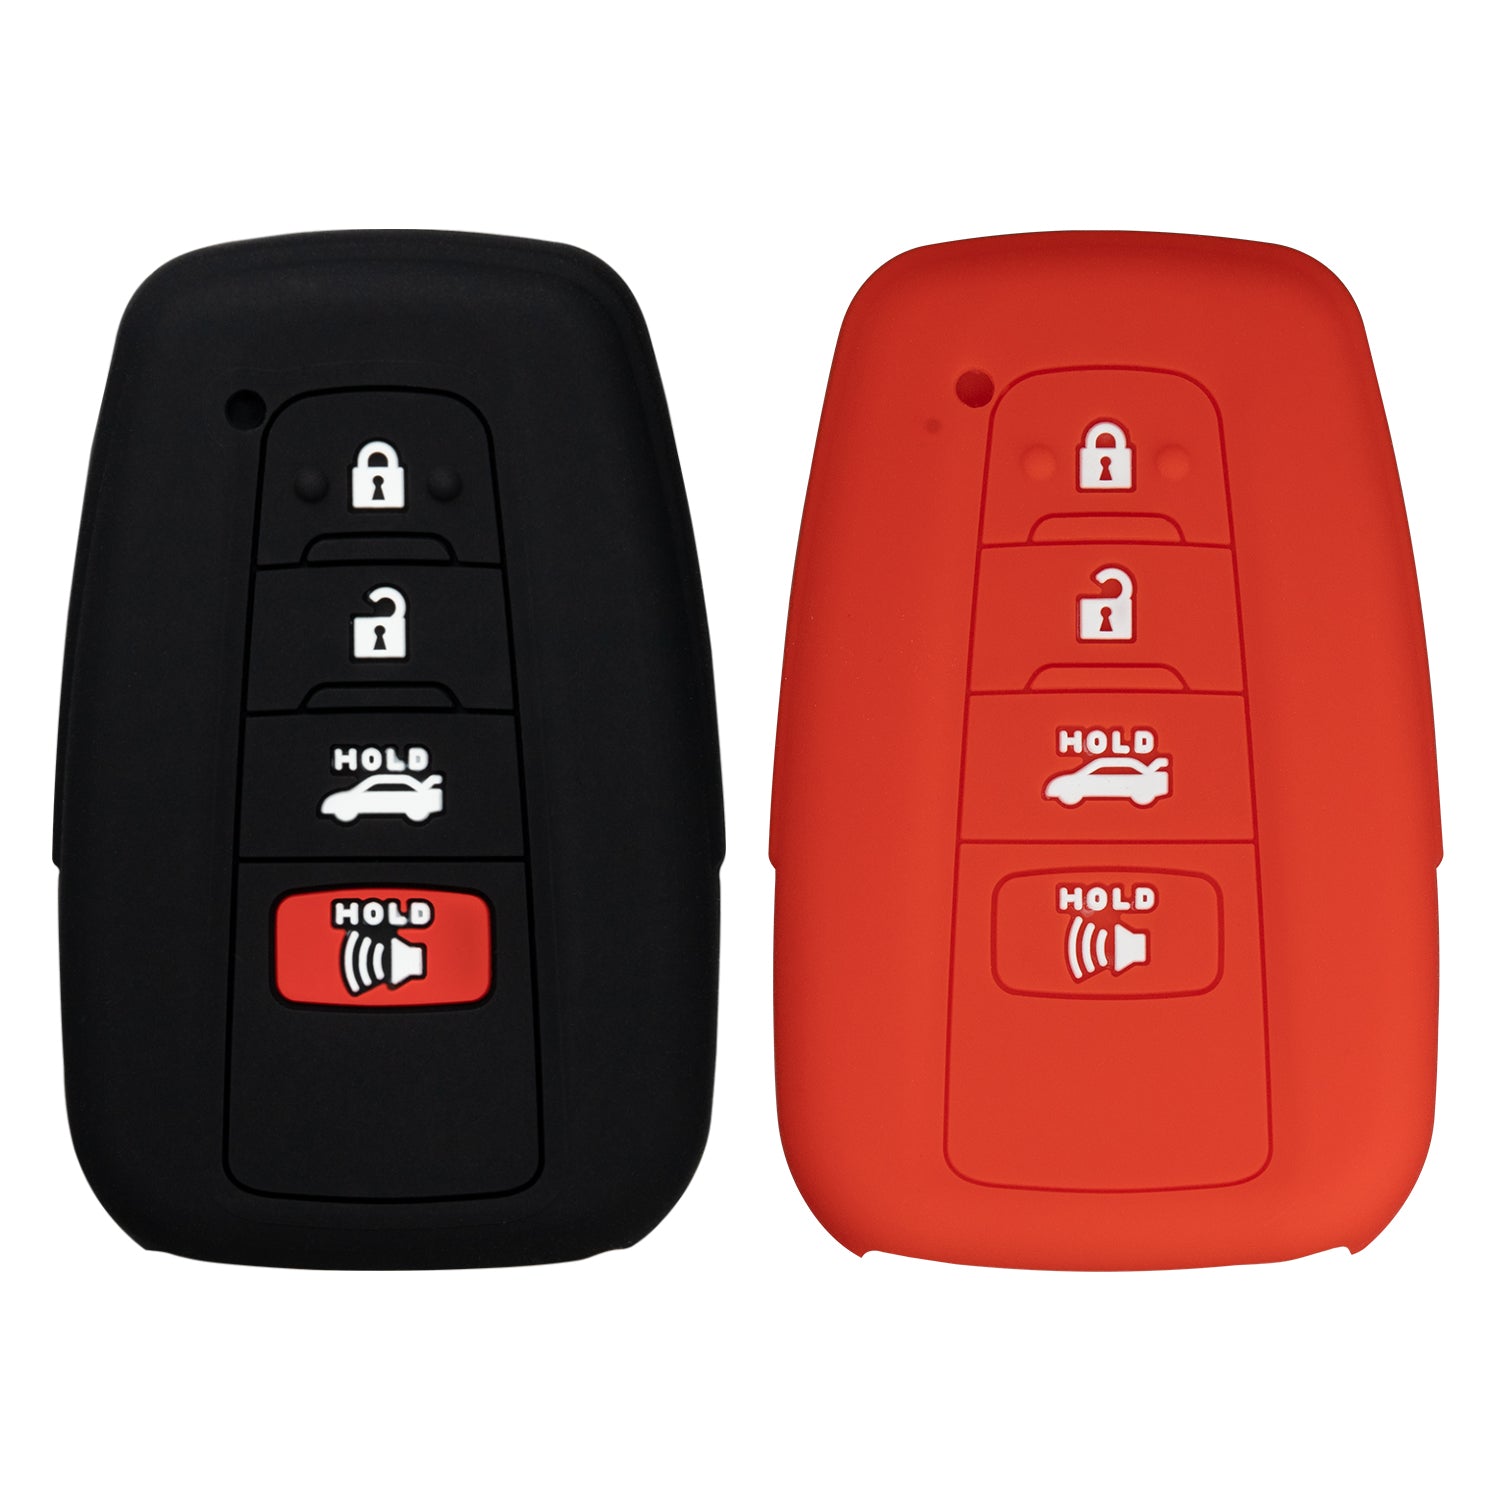 Silicone Case 4 Button Shell for Toyota Smart Proximity Remote Key HYQ14FBE, HYQ14FBC, HYQ14AHP, HYQ14FBN (Black & Red)